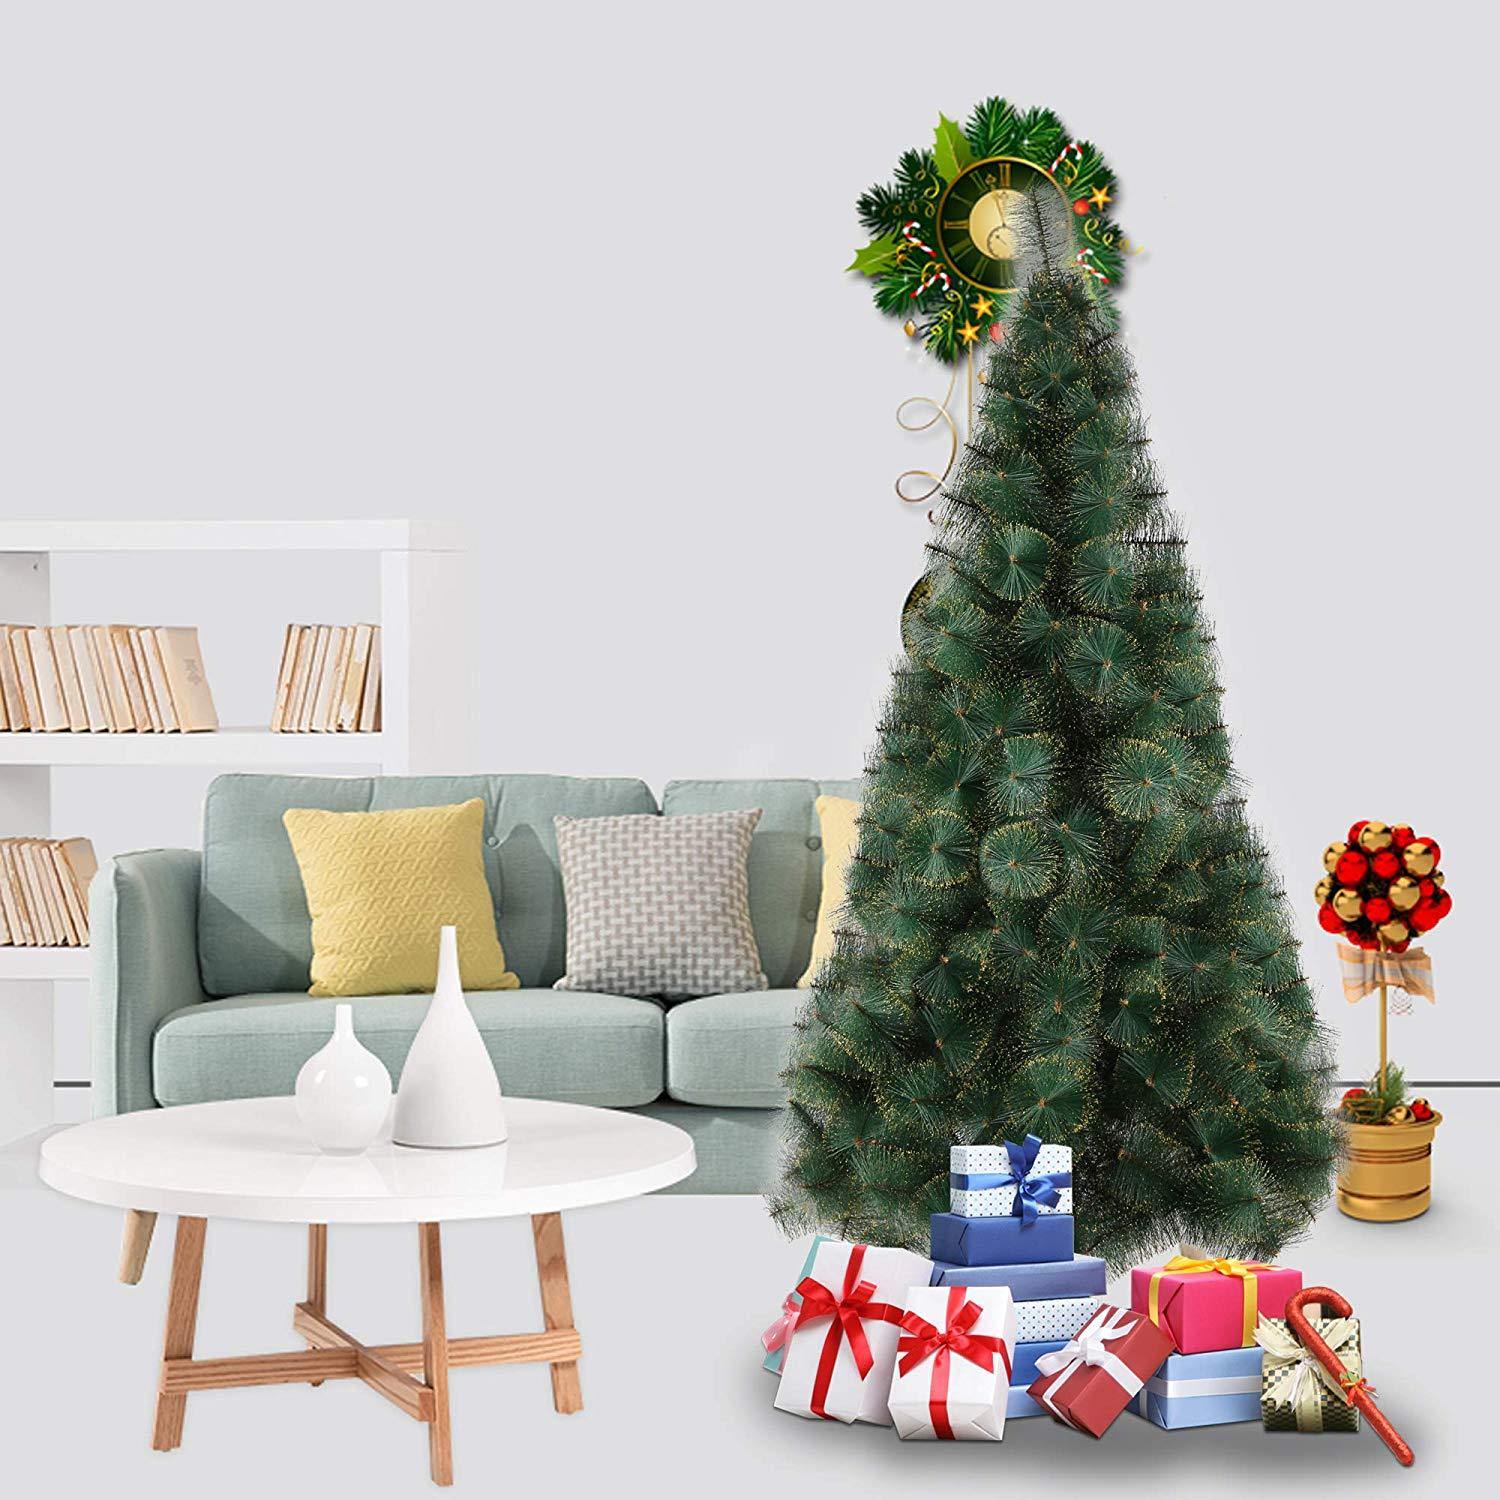 Bosonshop 7' Classic Pine Needle Tree Encrypted Artificial Christmas Tree Natural Branch with Solid Metal Bracket, Coniferous with Golden Highlights